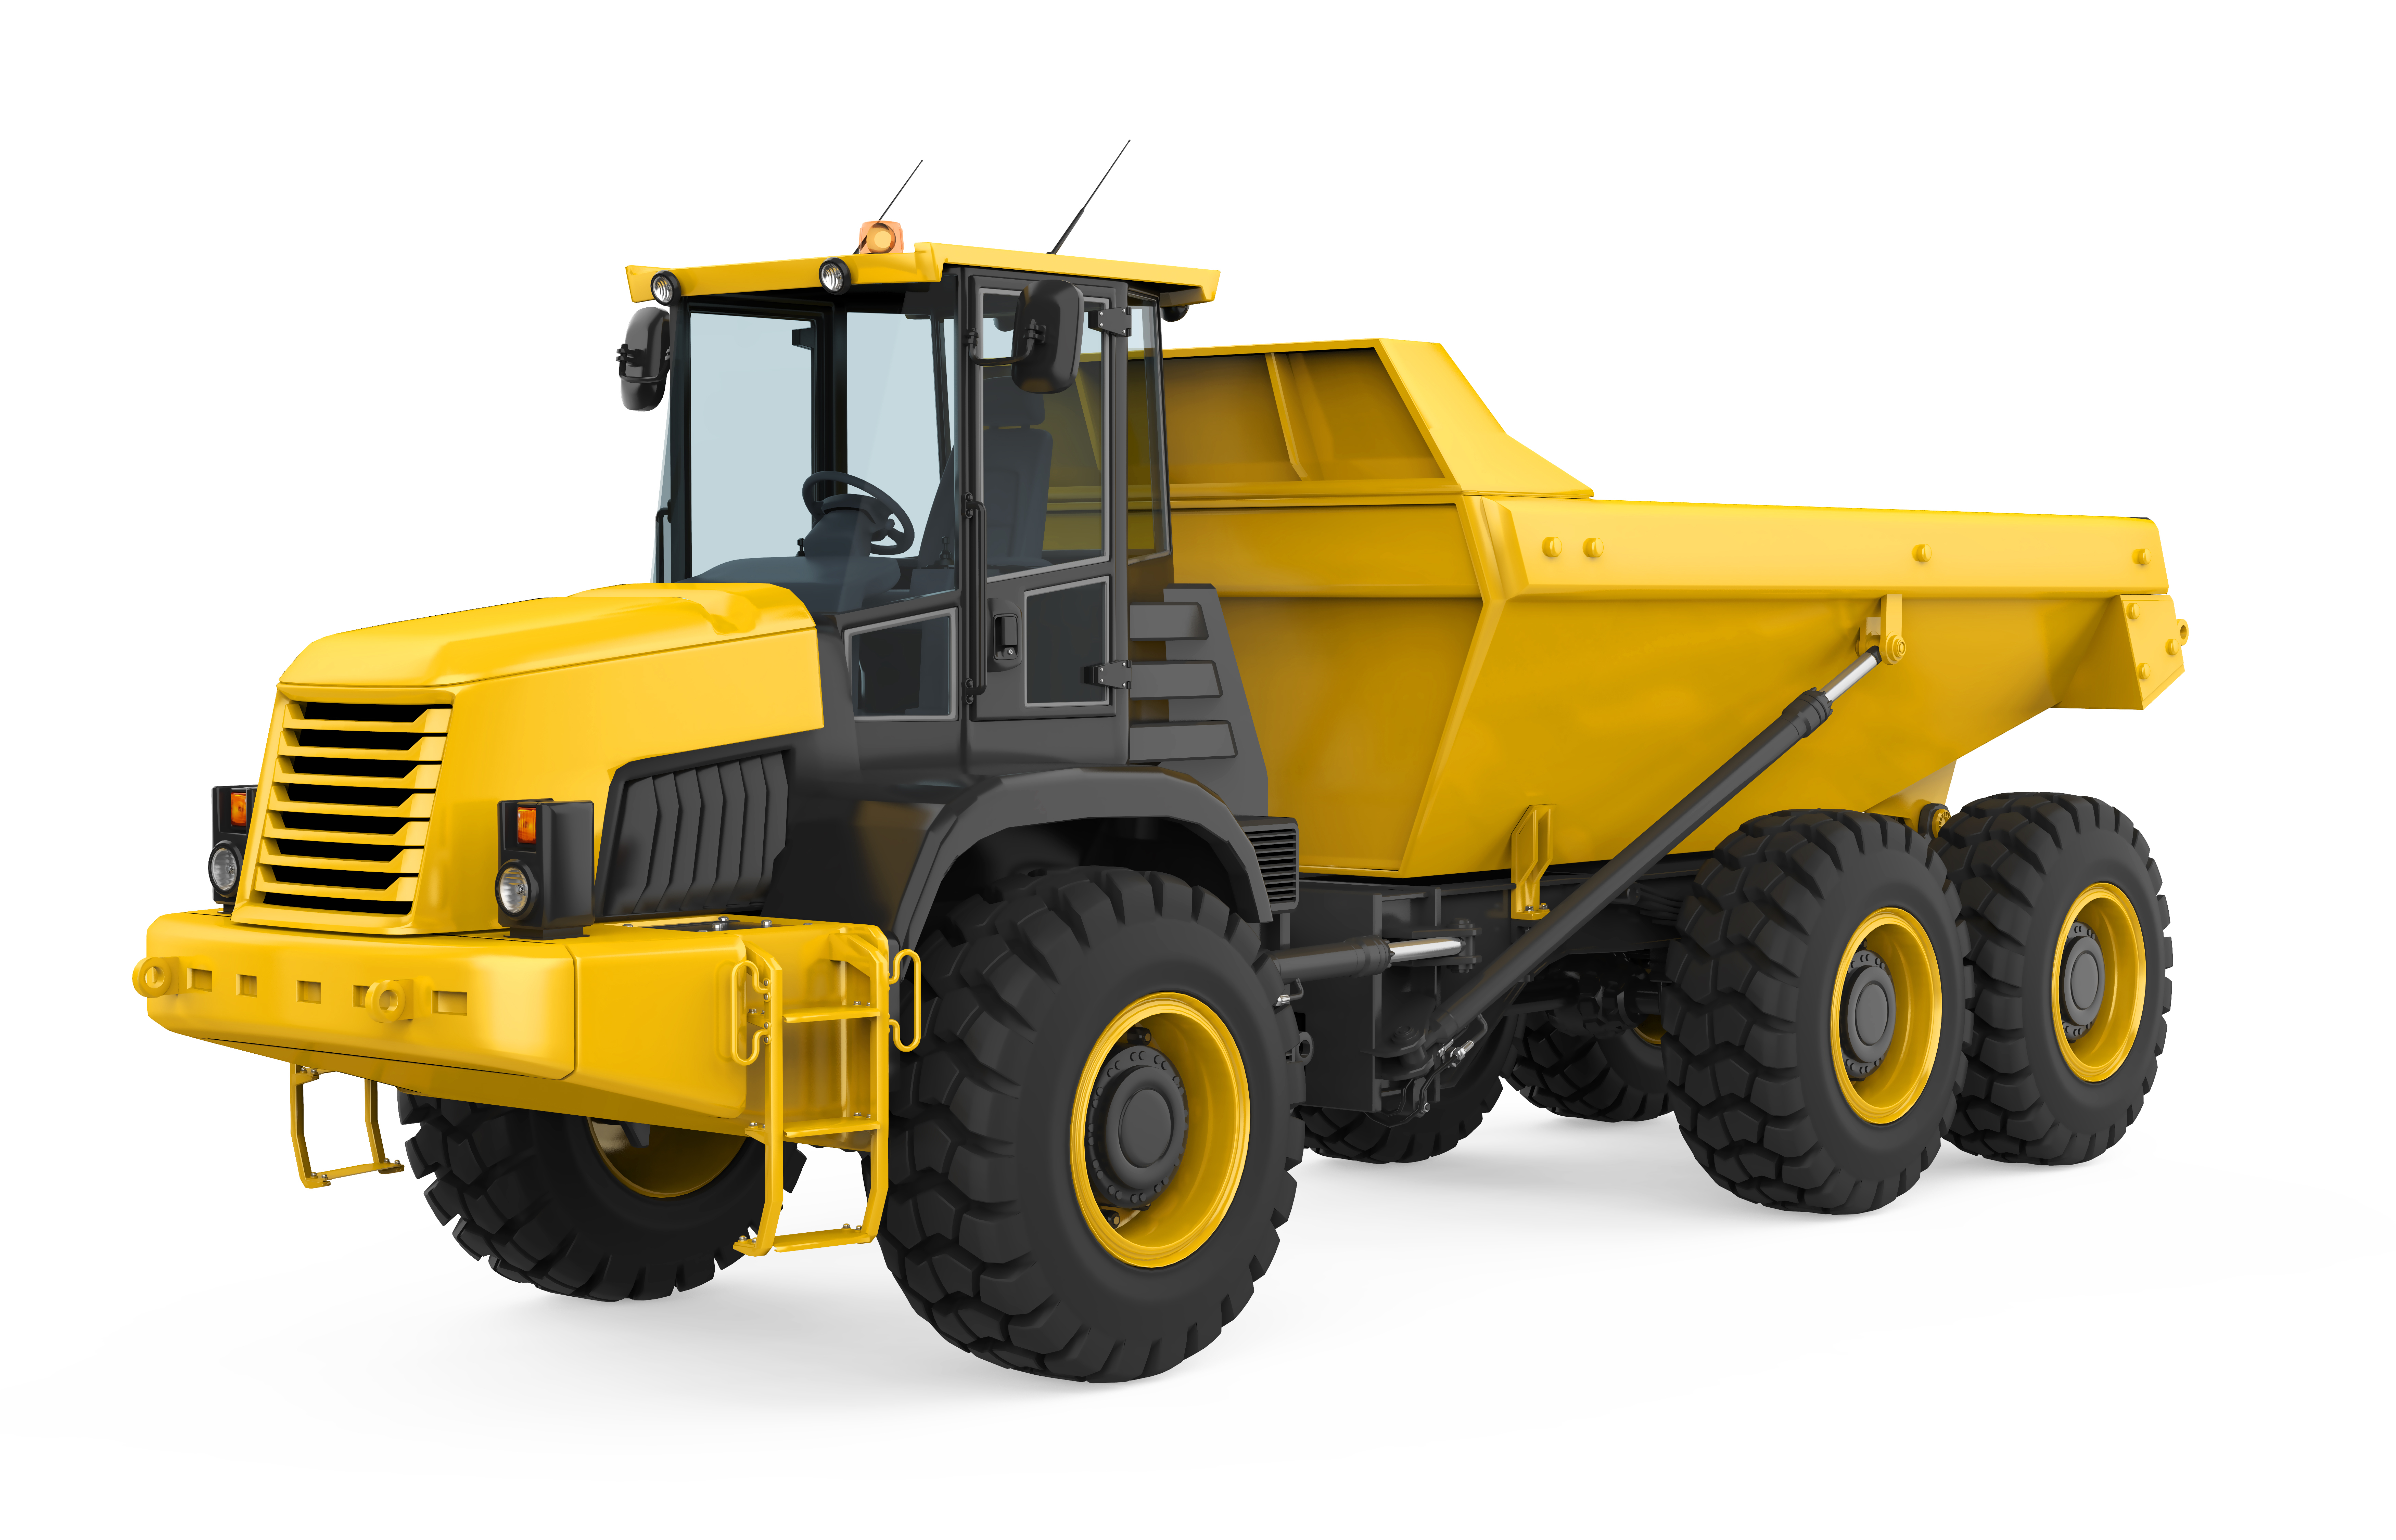 CPCS A56 - Dump Truck – Articulated Chassis